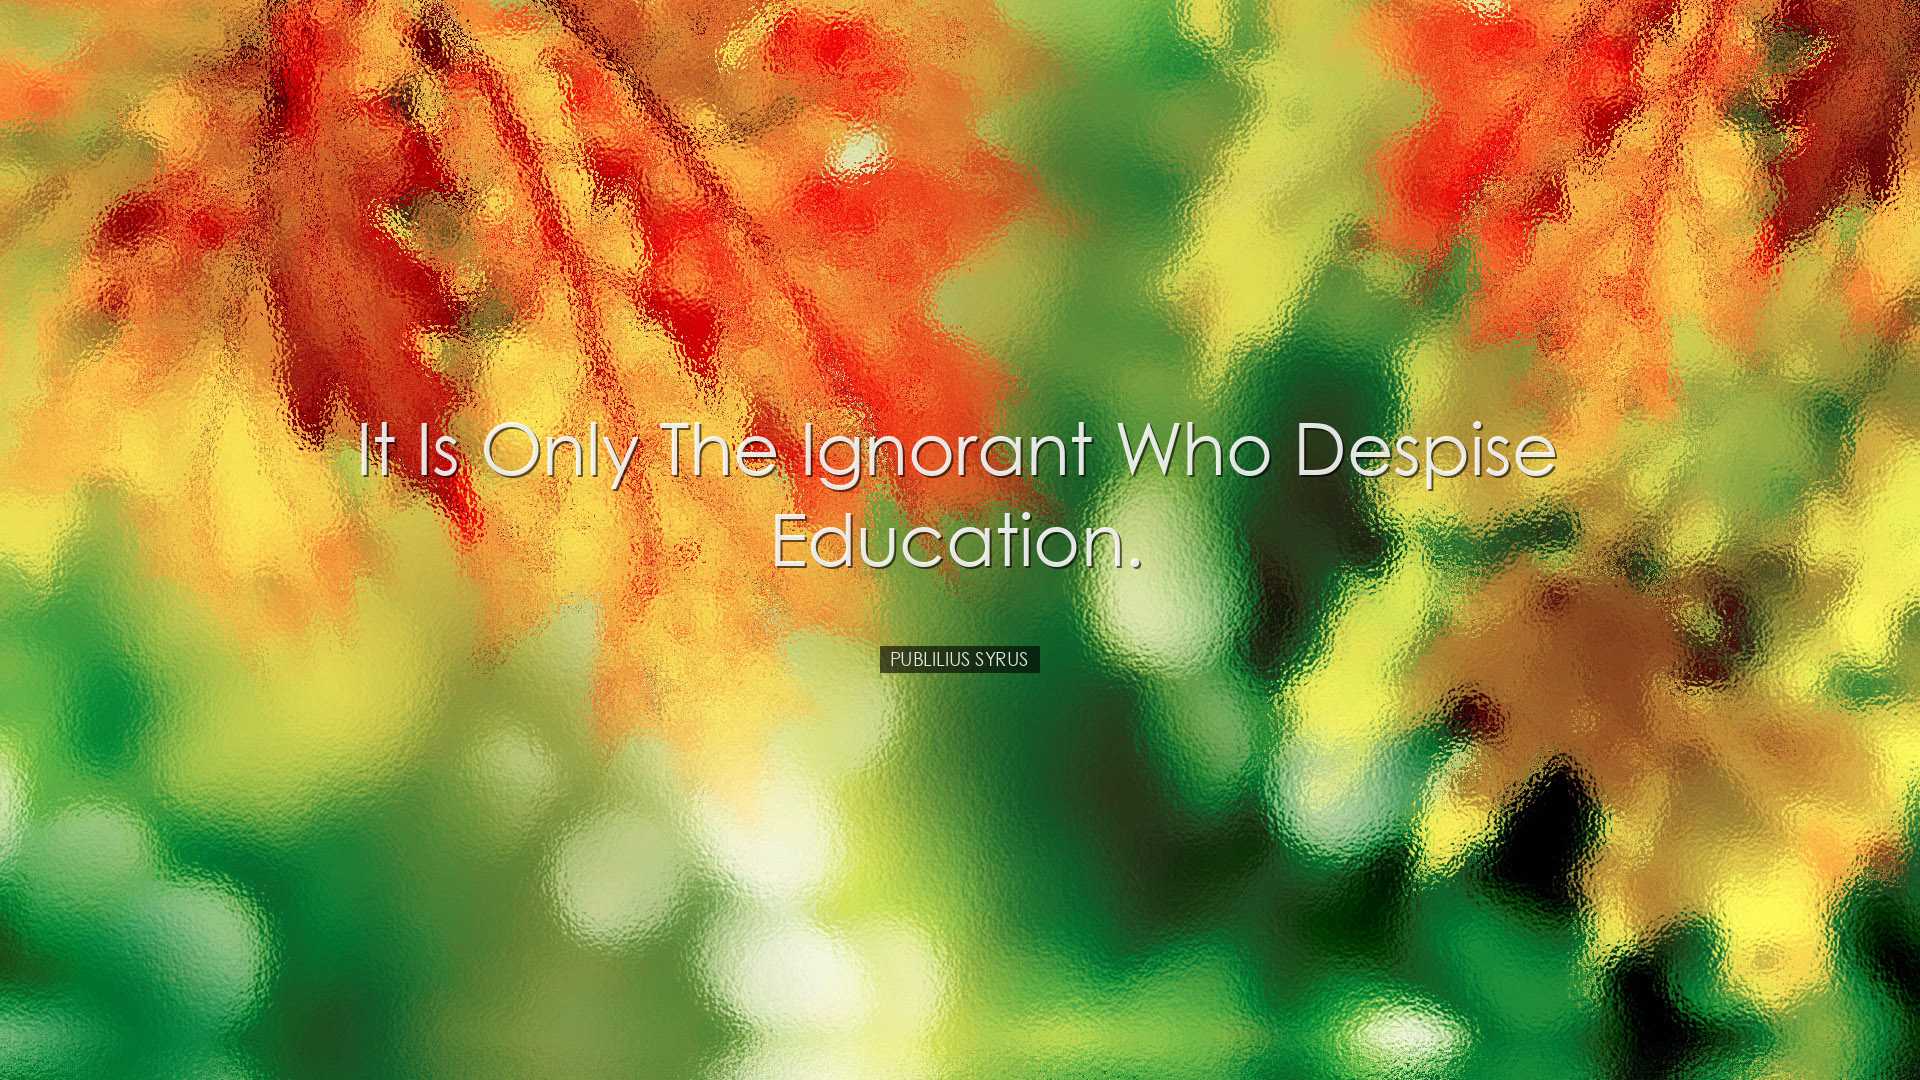 It is only the ignorant who despise education. - Publilius Syrus